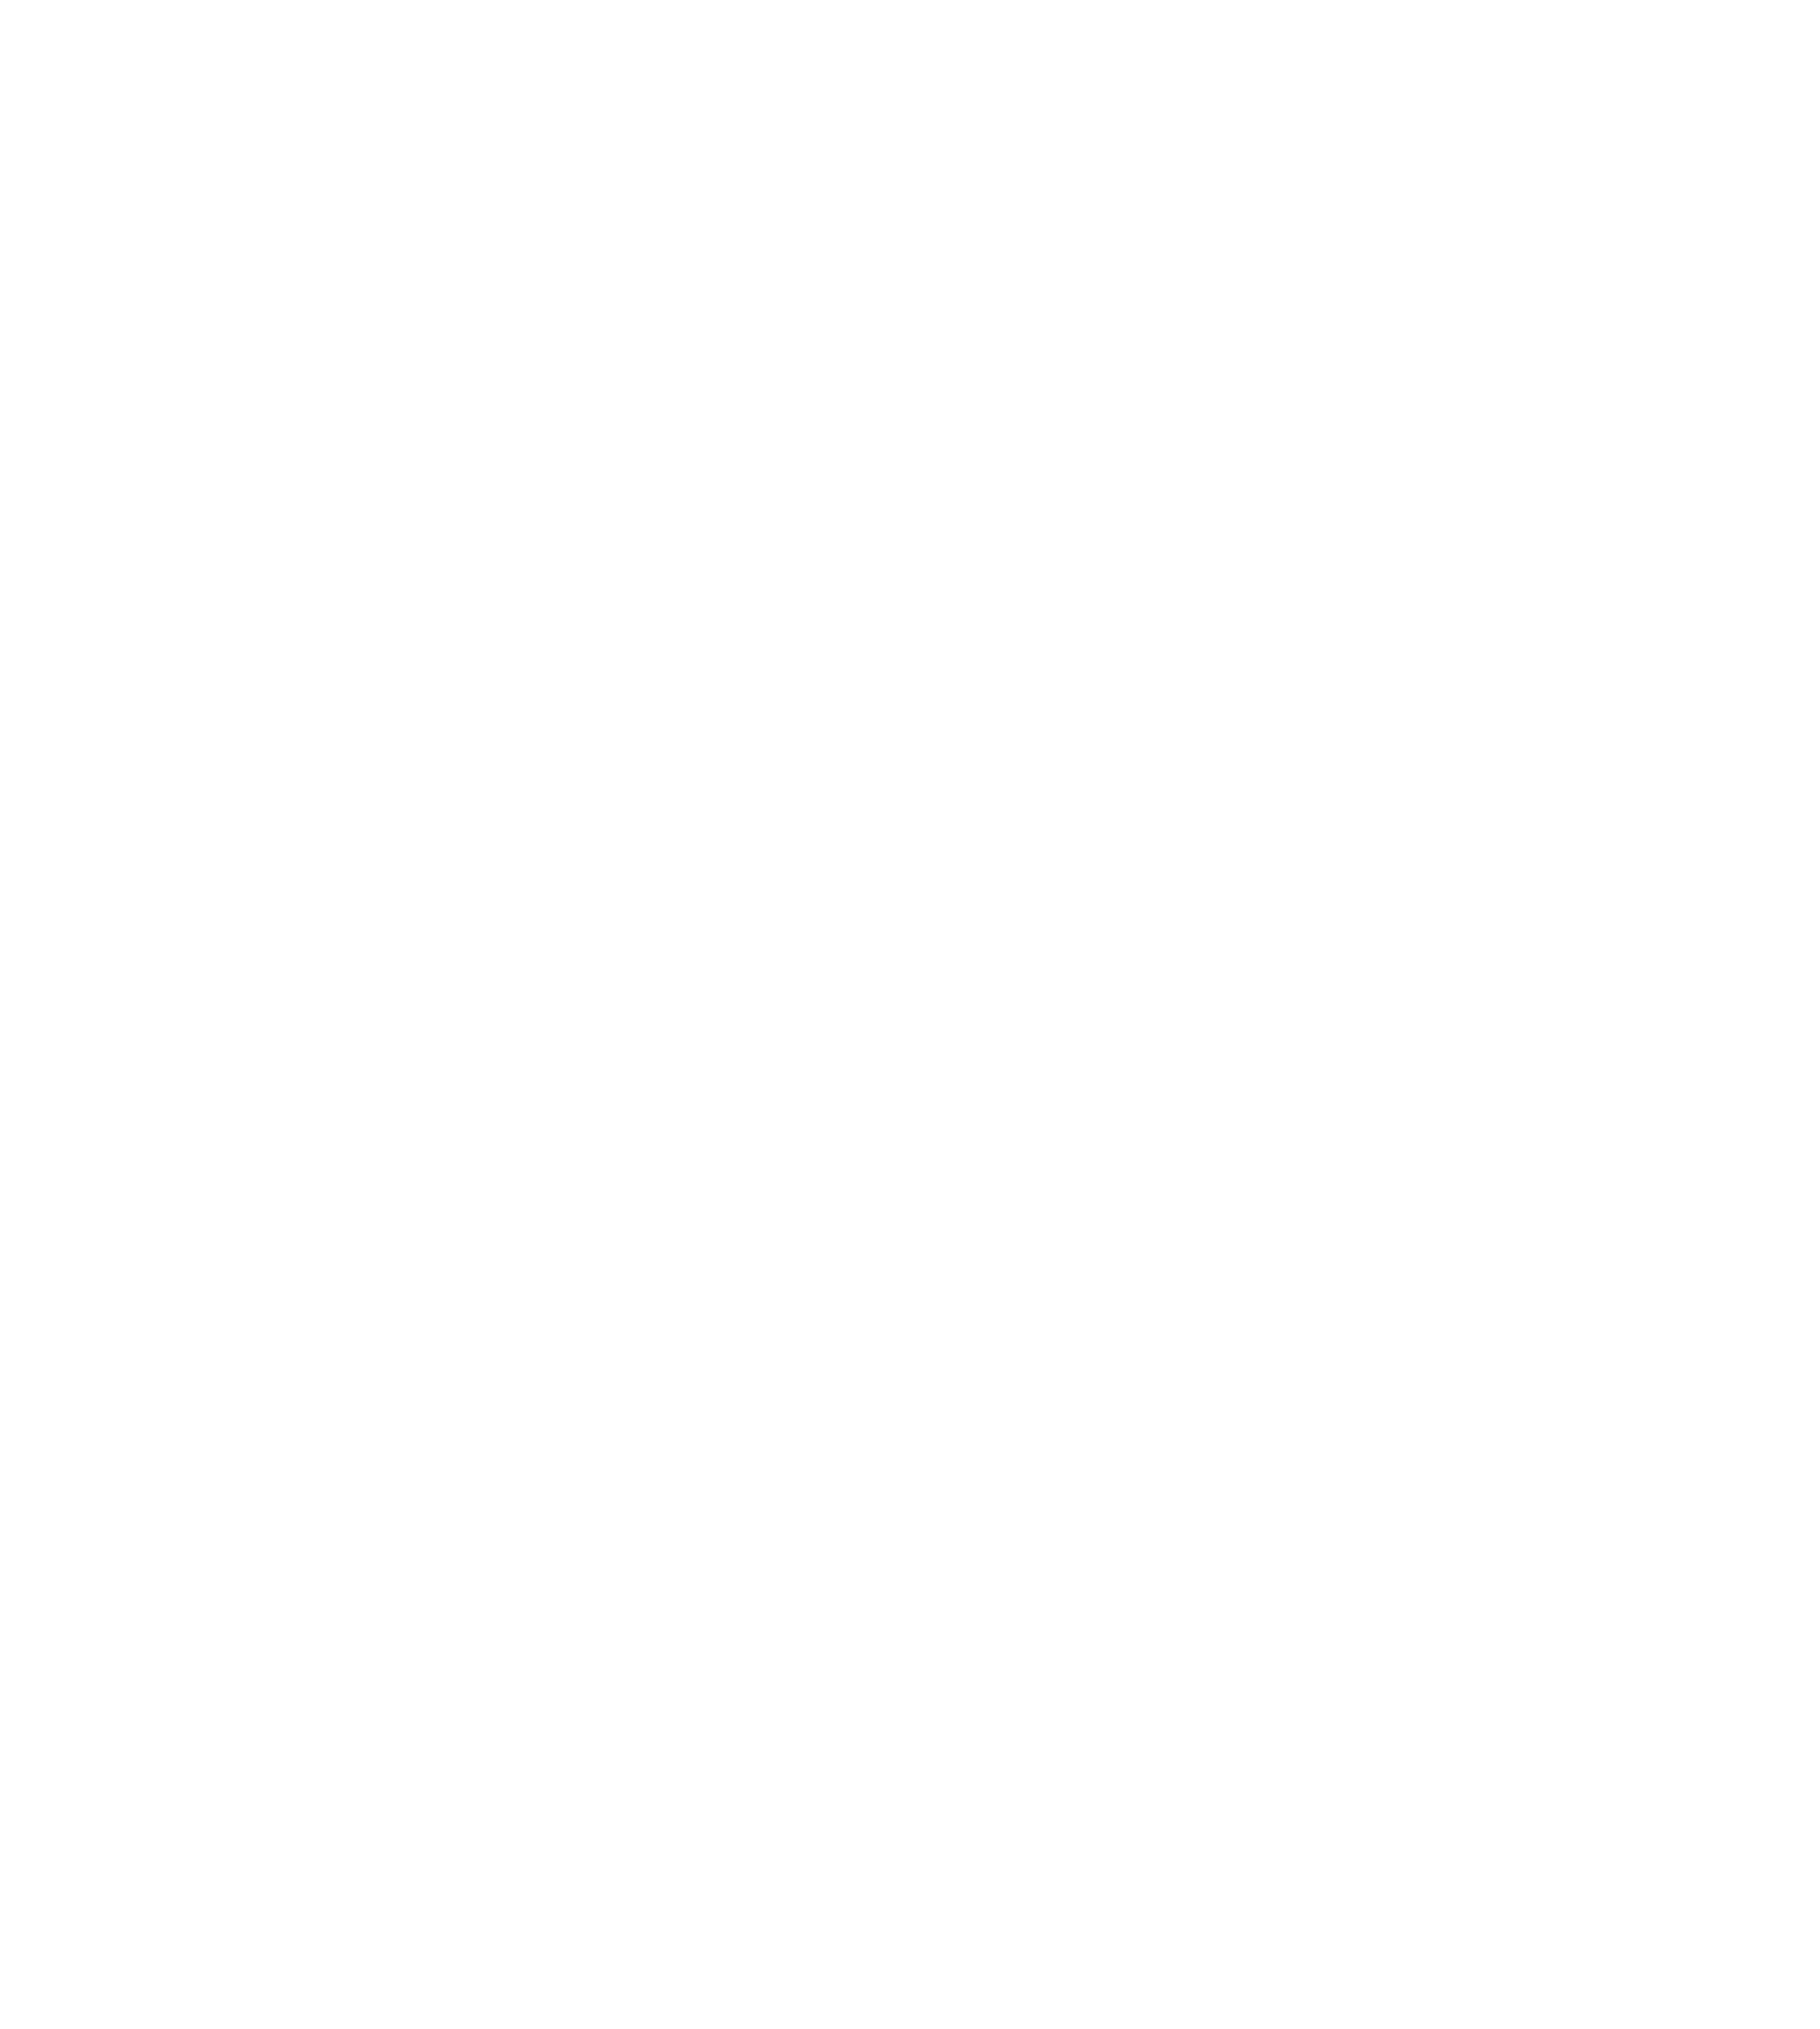 Silver Snowflake Clip Art​  Gallery Yopriceville - High-Quality Free  Images and Transparent PNG Clipart